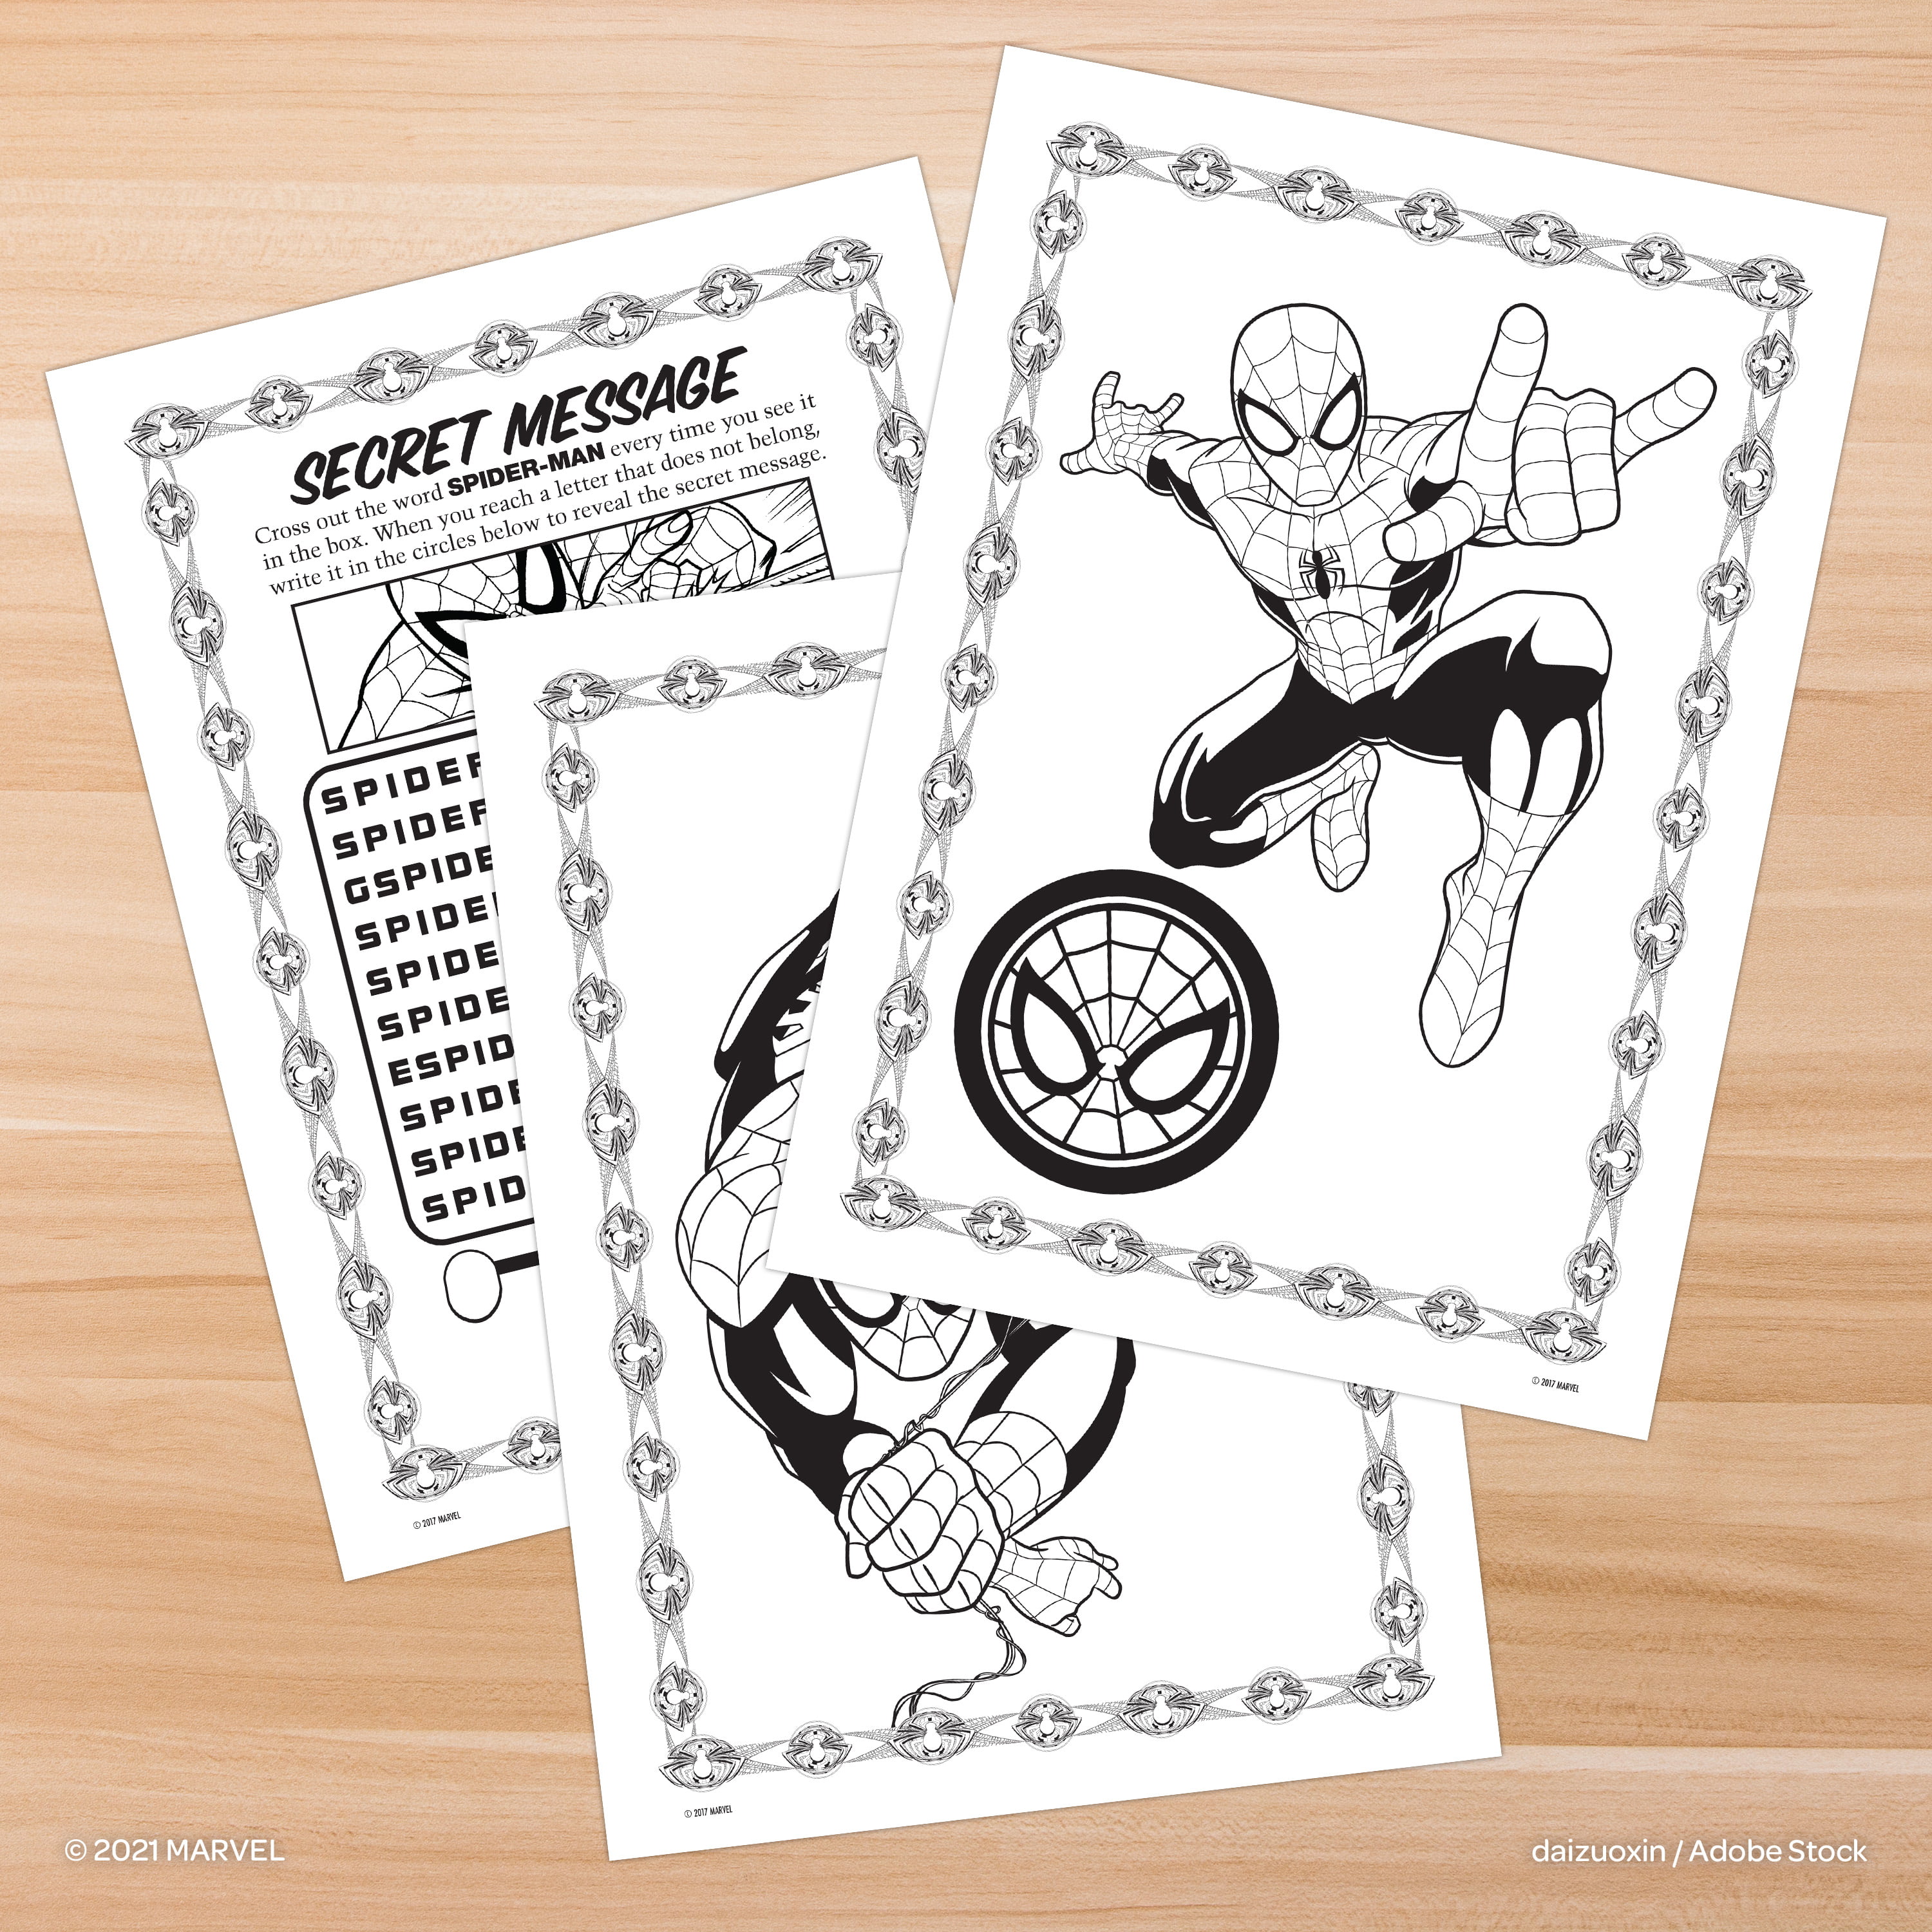 Marvel spiderman jumbo coloring activity book pages paperback